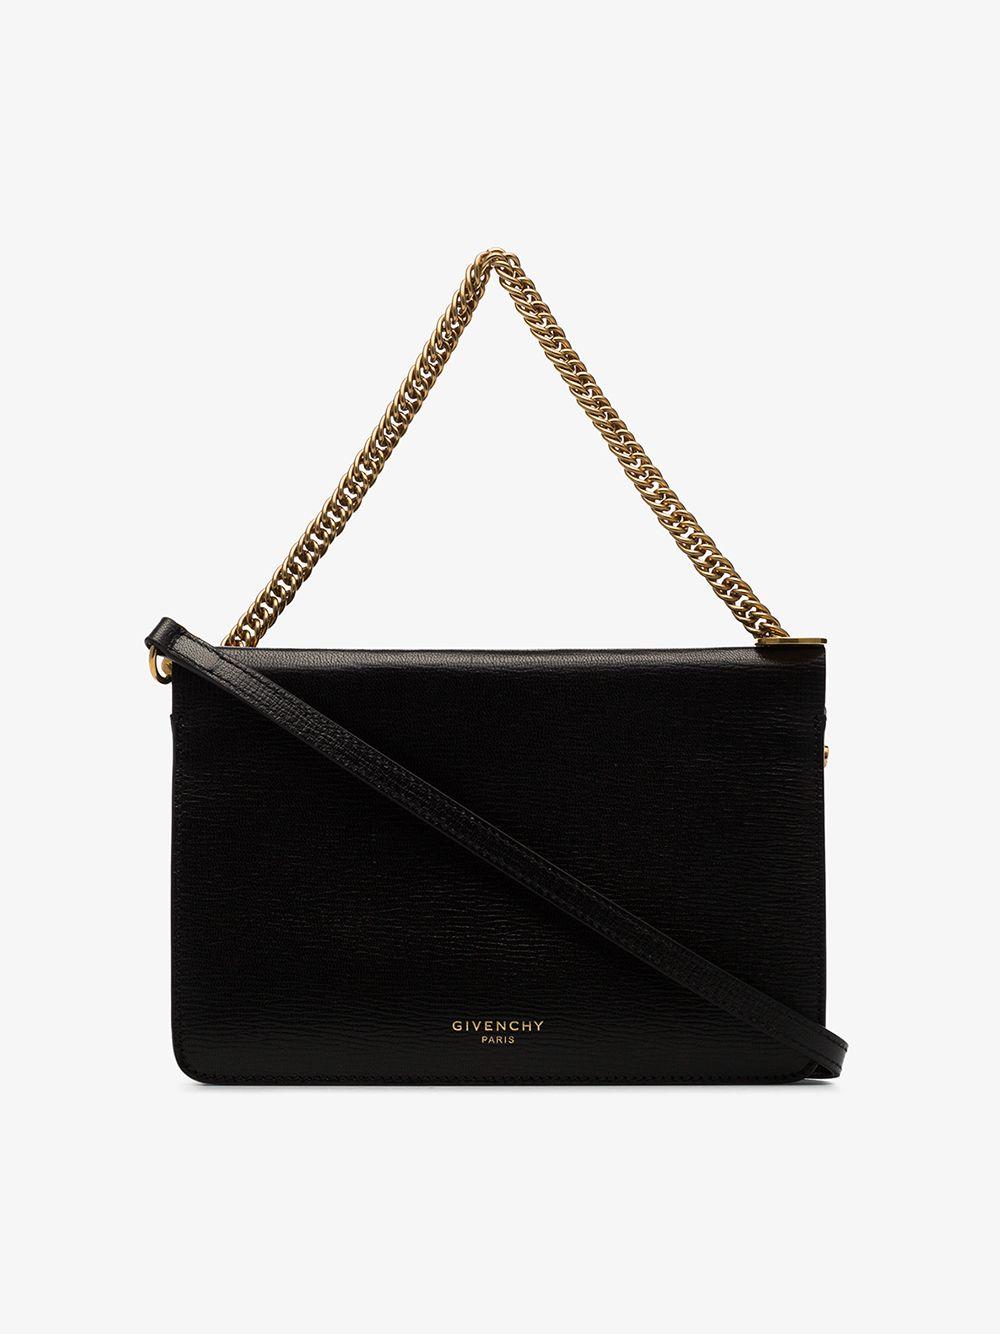 Electronic Perception hill Givenchy Leather Chain Handle Crossbody Bag in Black | Lyst